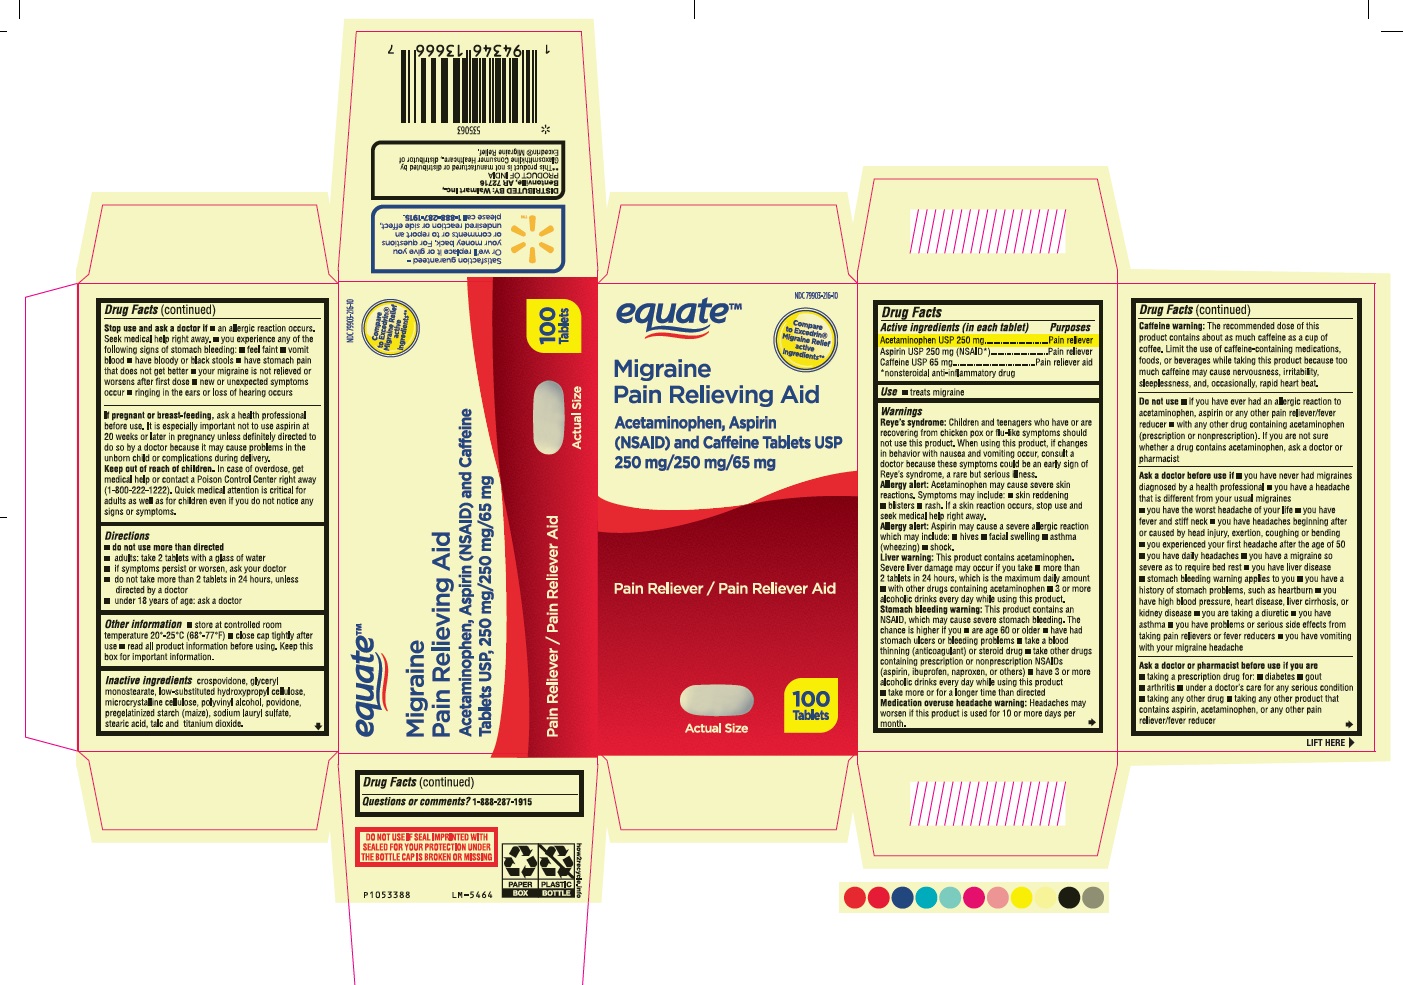 PACKAGE LABEL-PRINCIPAL DISPLAY PANEL - 250 mg/250 mg/65 mg Container Carton Label - 100 Tablets